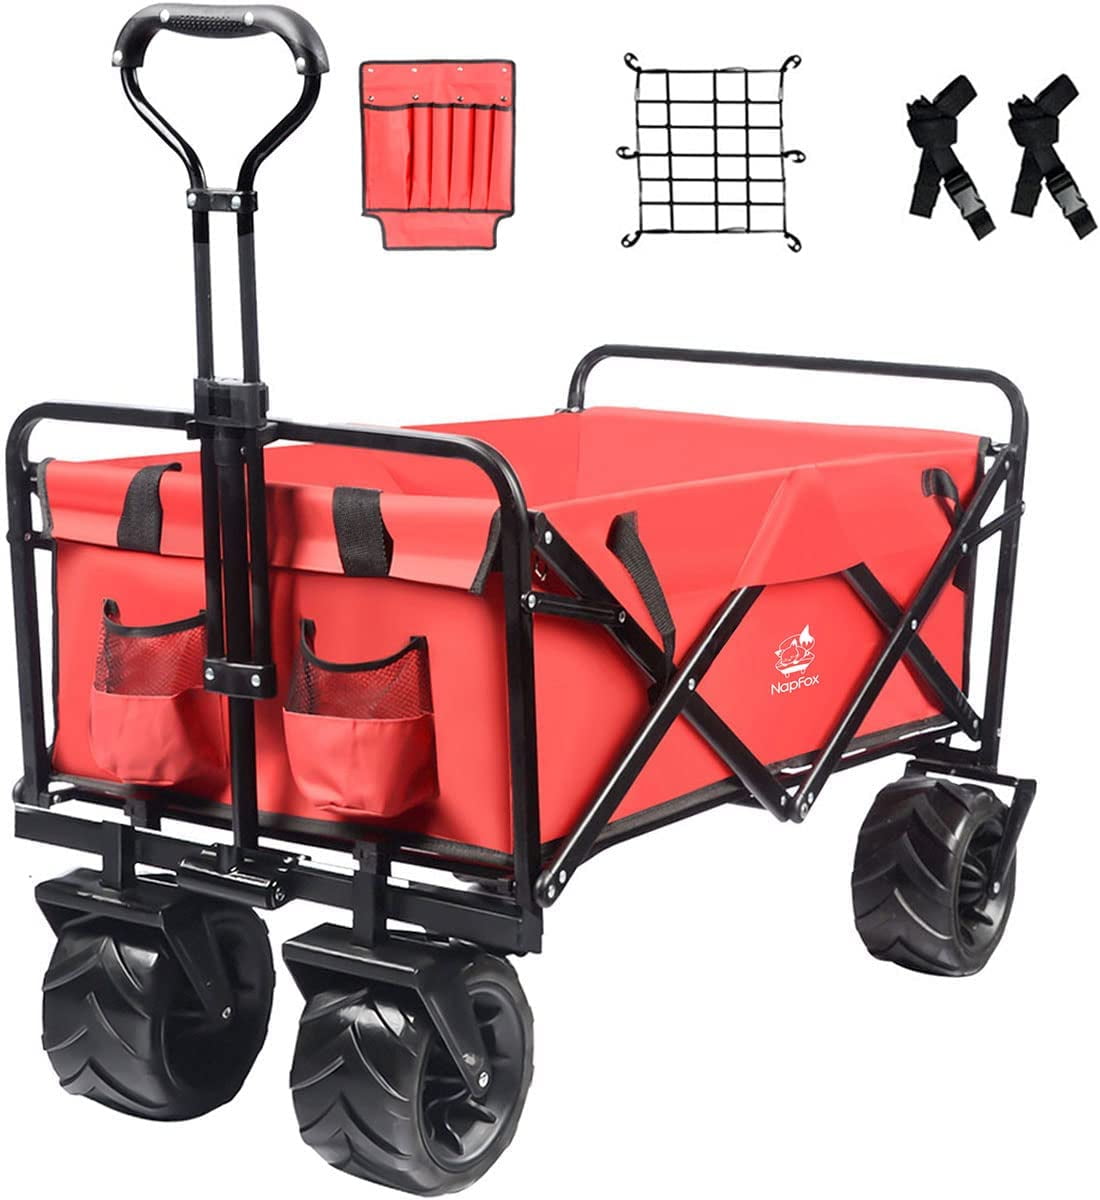  Wagon Cart with Wheels Foldable with Removable Canopy,Yard Carts  with Wheels Heavy Duty for Groceries, Sand, Garden, Camping : Toys & Games